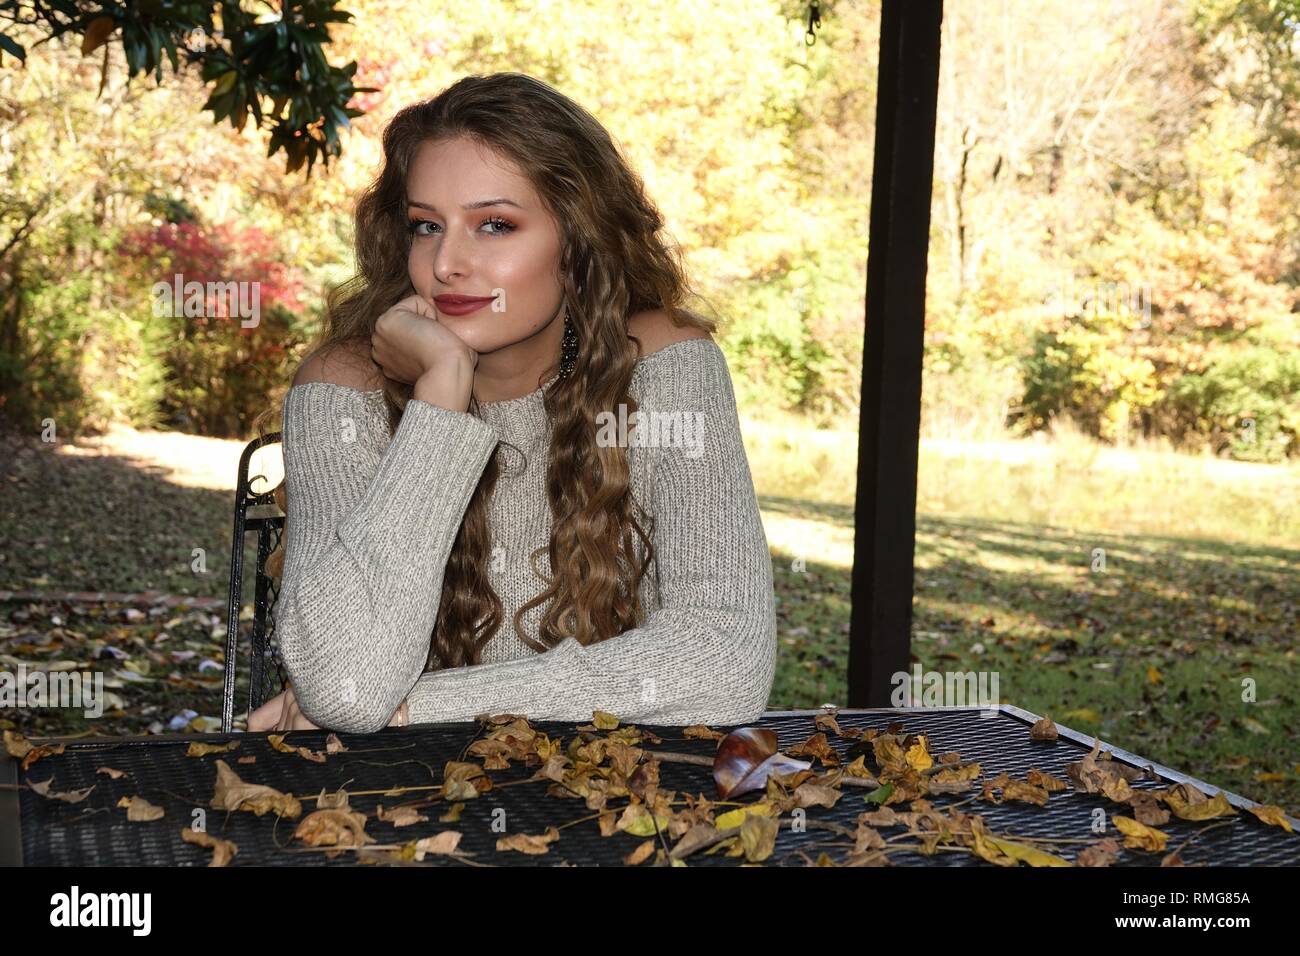 Beautiful country girl in a Fall country setting Stock Photo